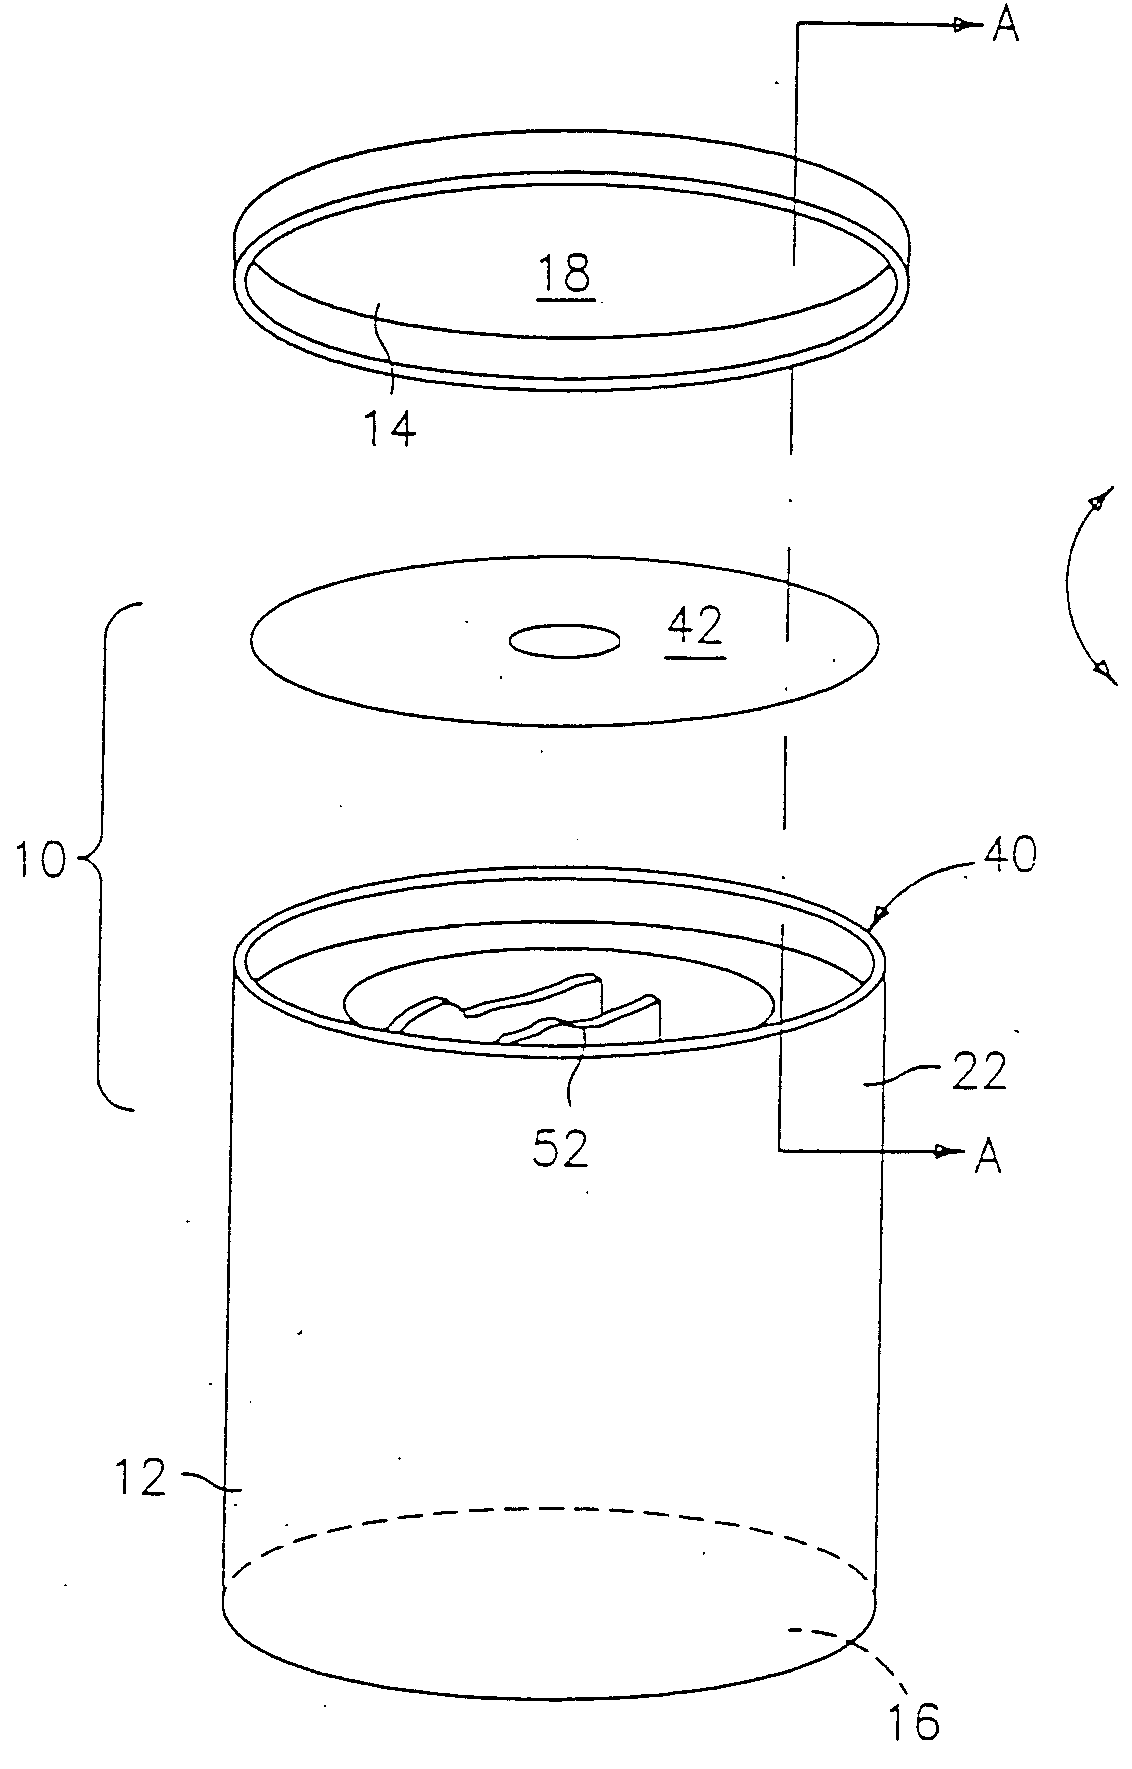 Packaging device for disc-shaped items and related materials and method for packaging such discs and material